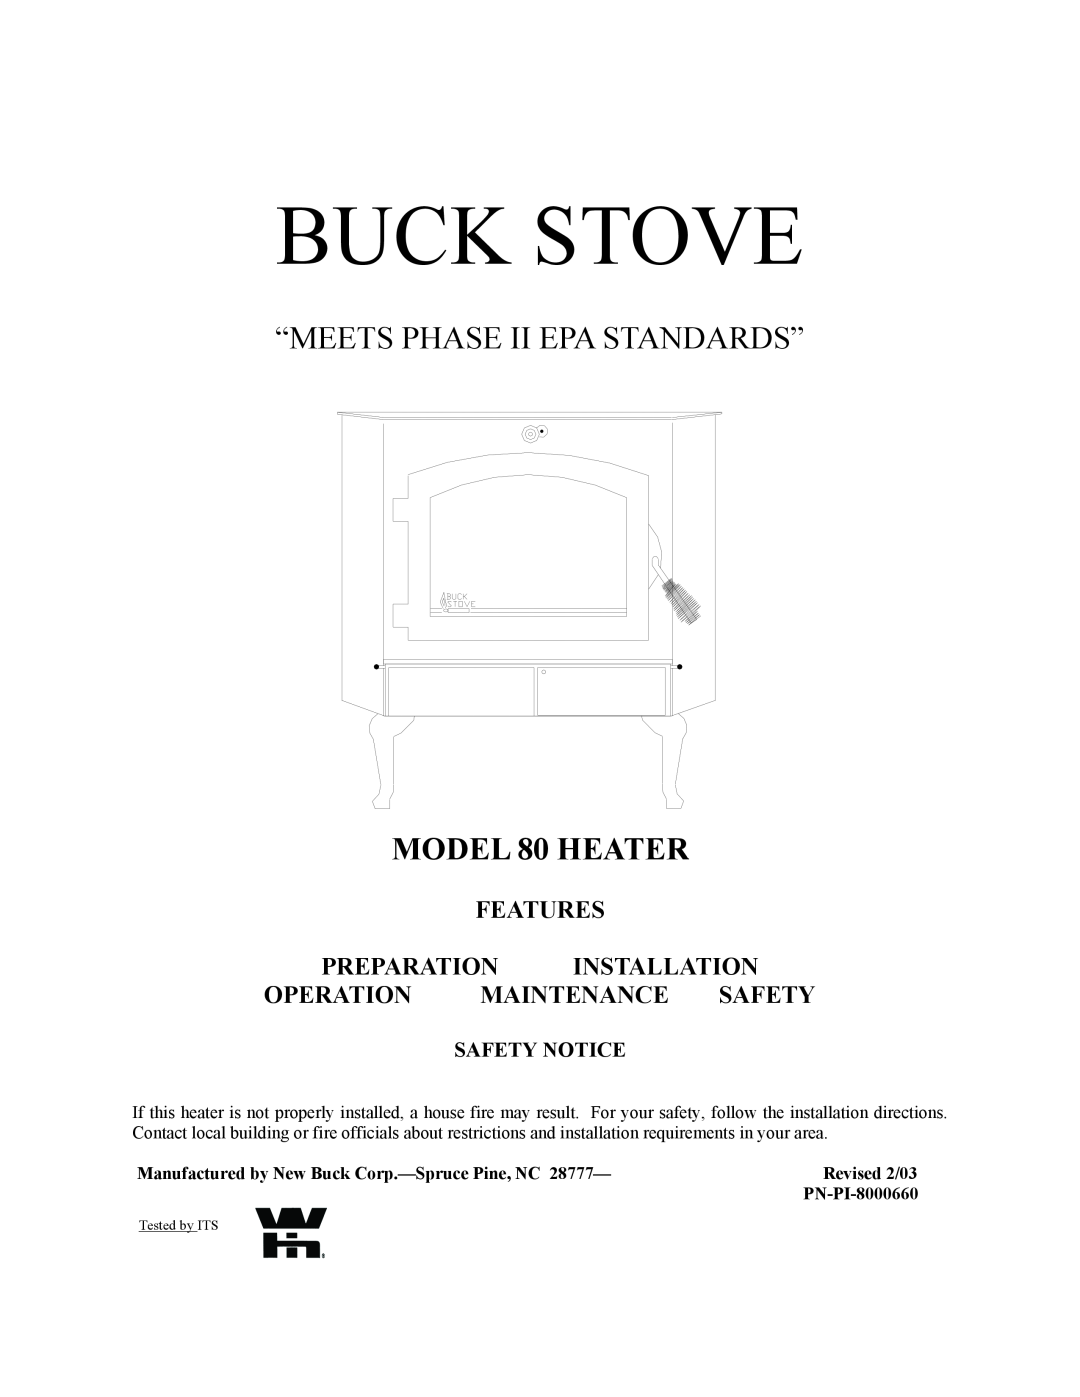 New Buck Corporation Heater Model 80 manual Features Preparation Installation, Operation Maintenance Safety, Safety Notice 